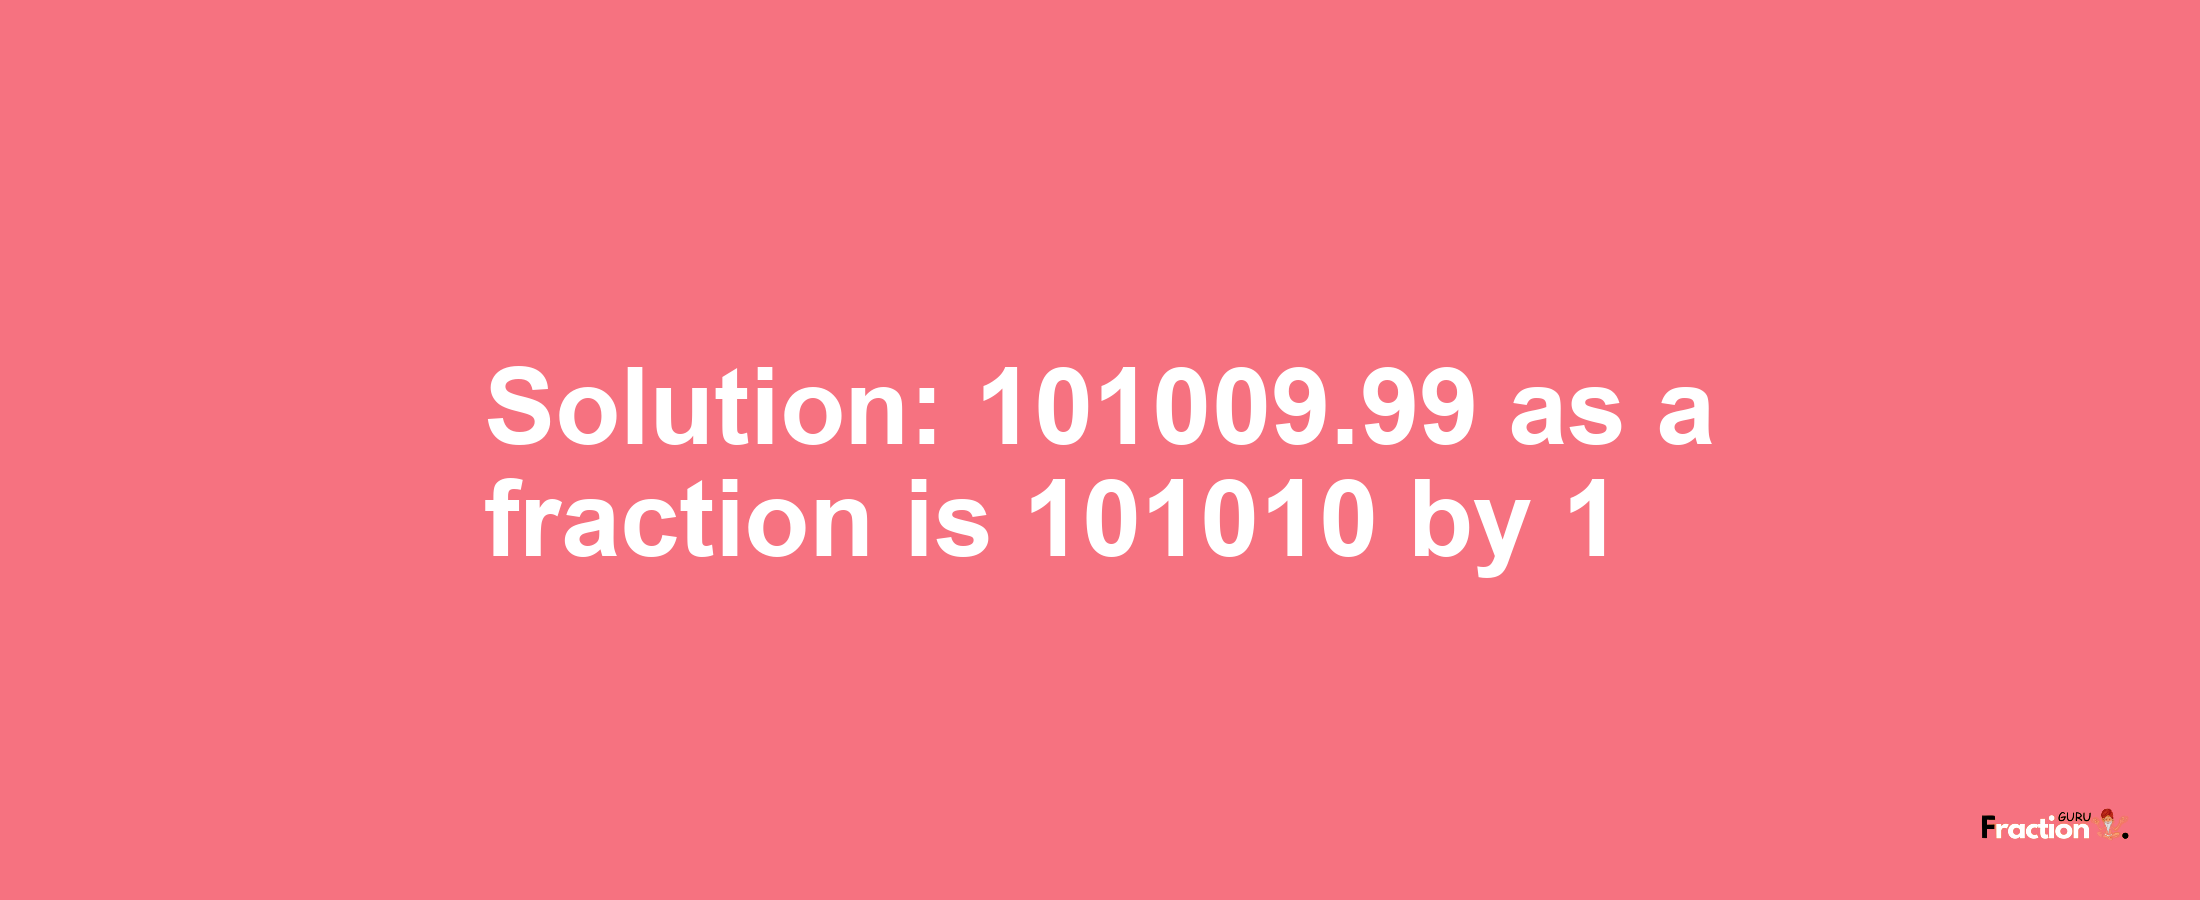 Solution:101009.99 as a fraction is 101010/1